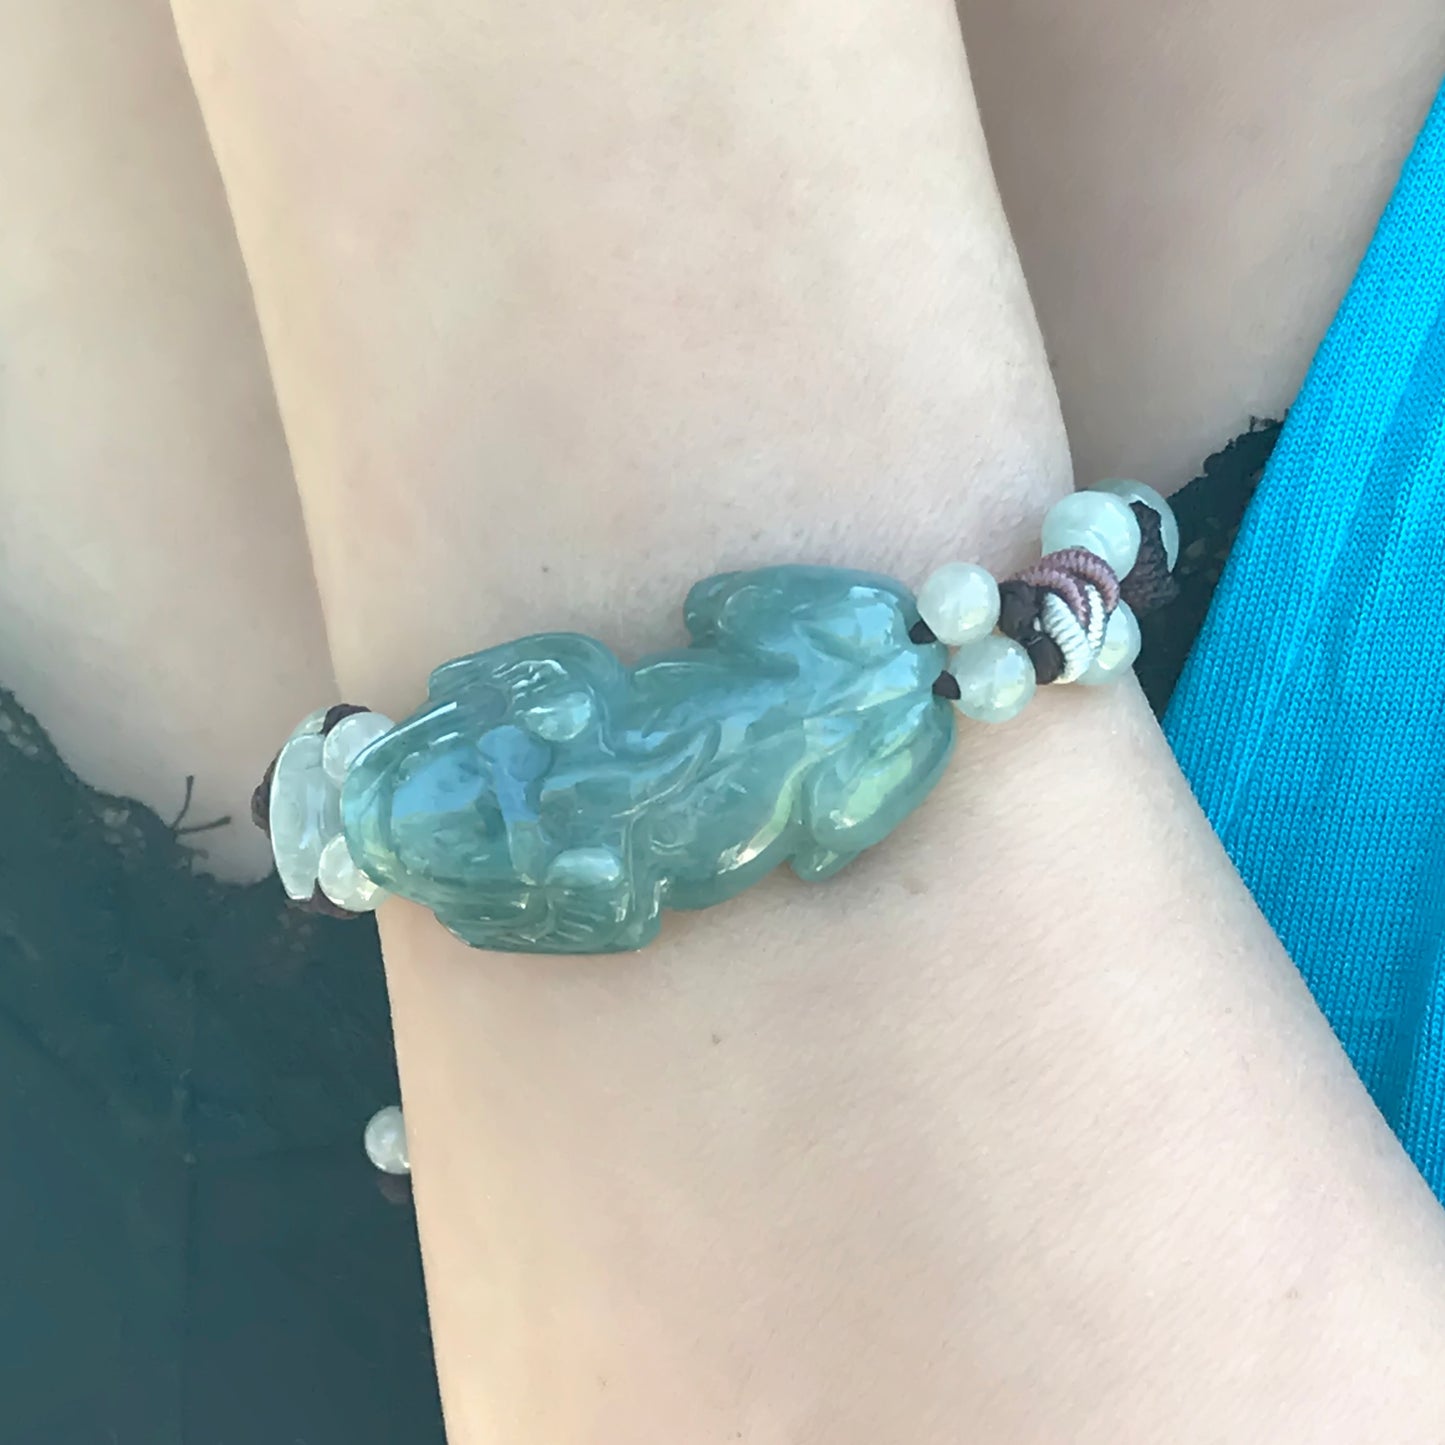 Express your Personal Style with this Unique Pi Yau Jade Bracelet